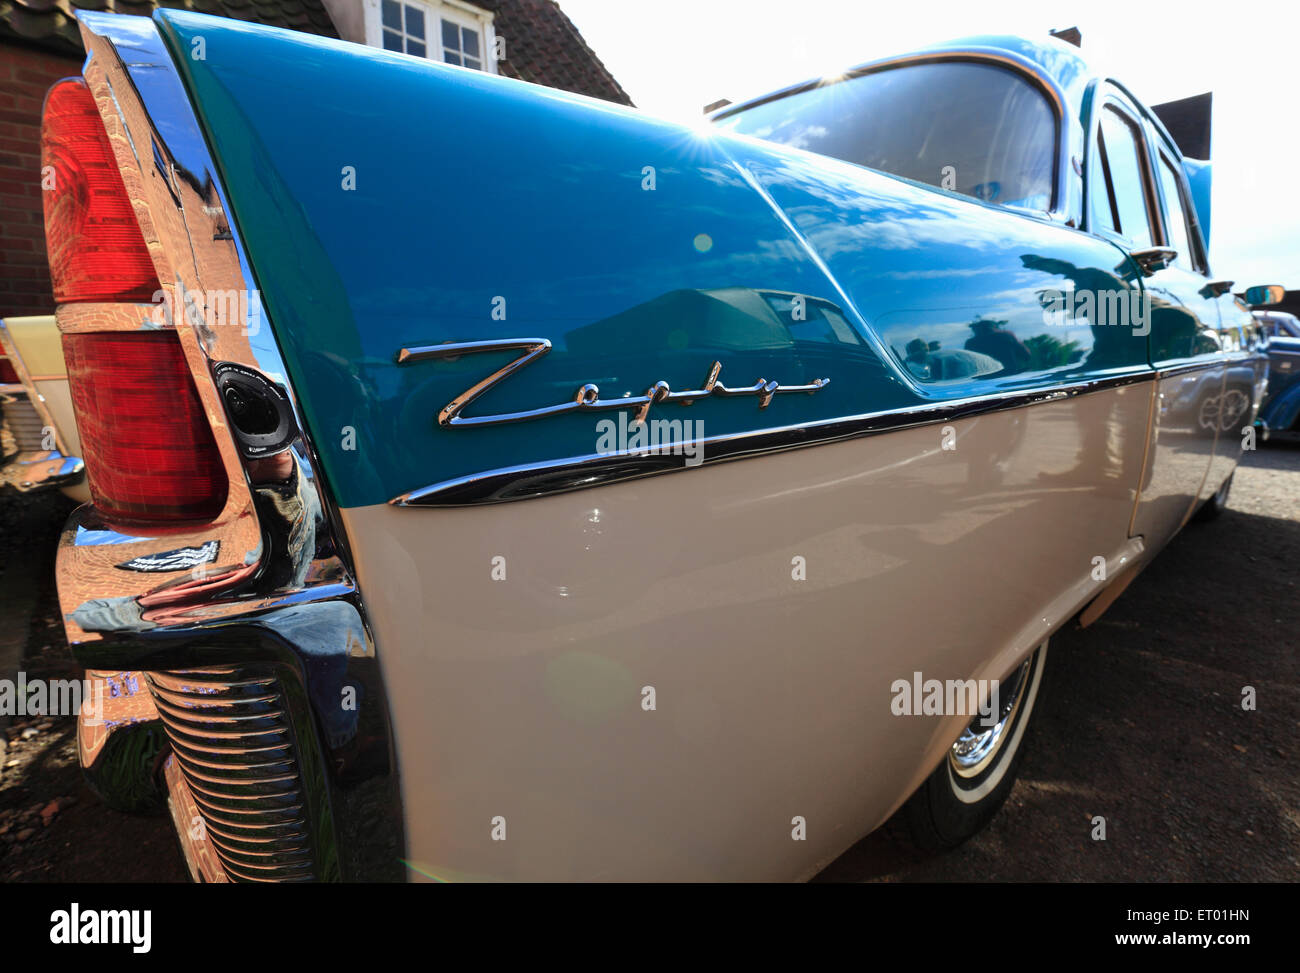 Ford Zephyr classic car. Stock Photo